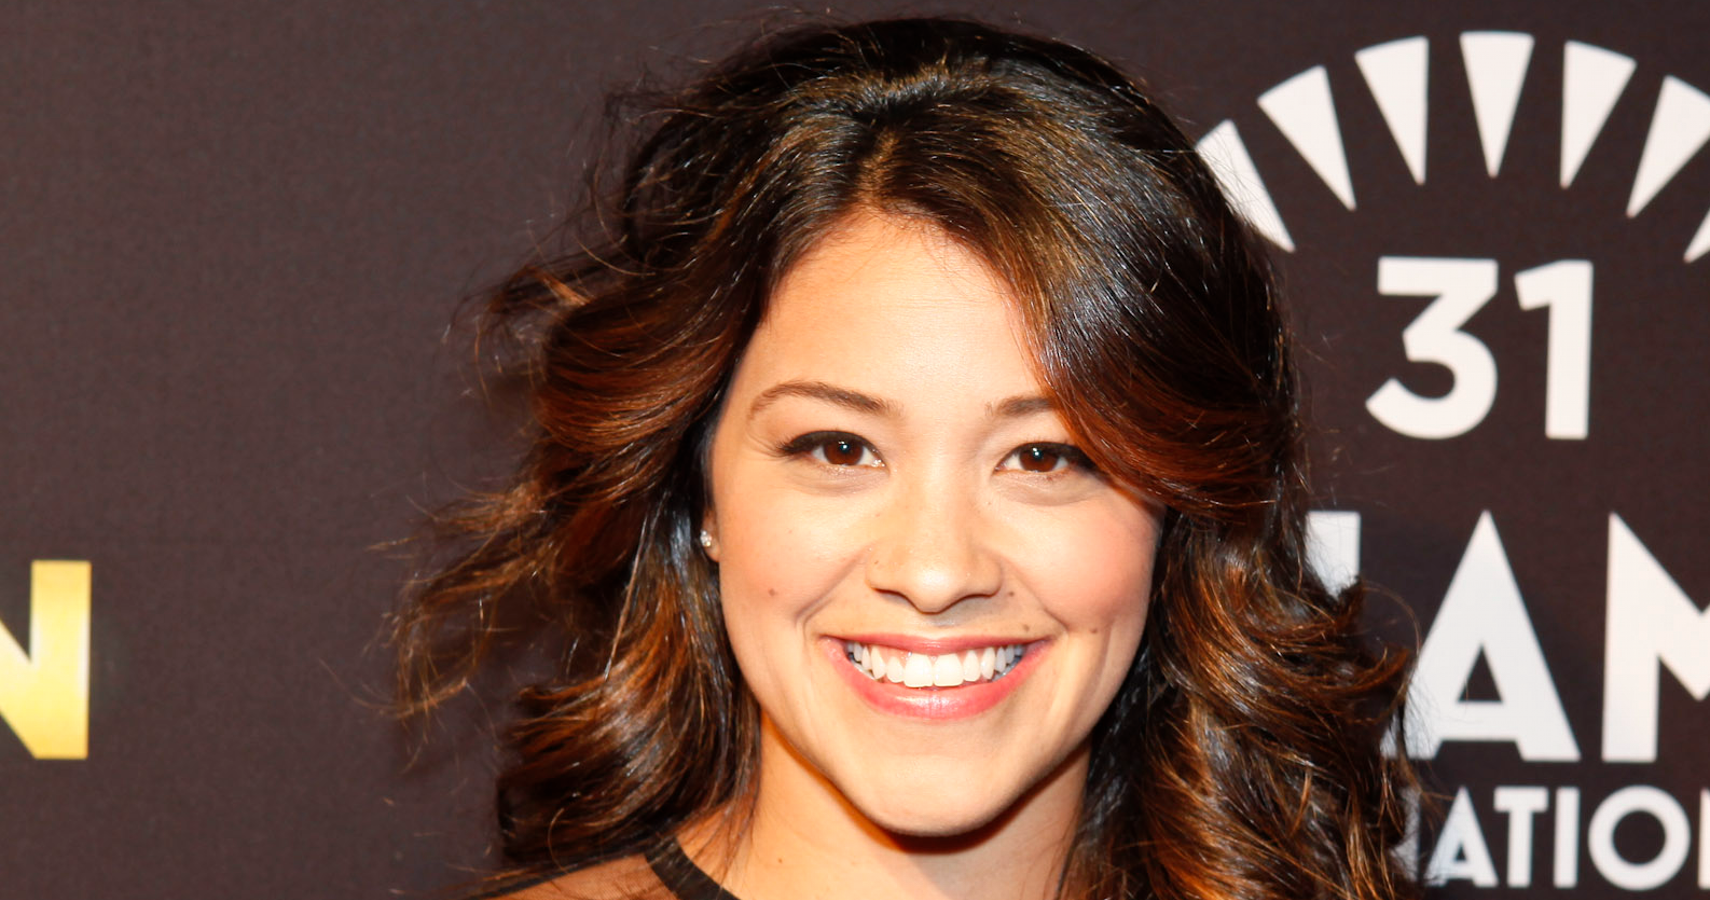 Gina_Rodriguez_at_Filly_Brown_Miami_premiere_(cropped)